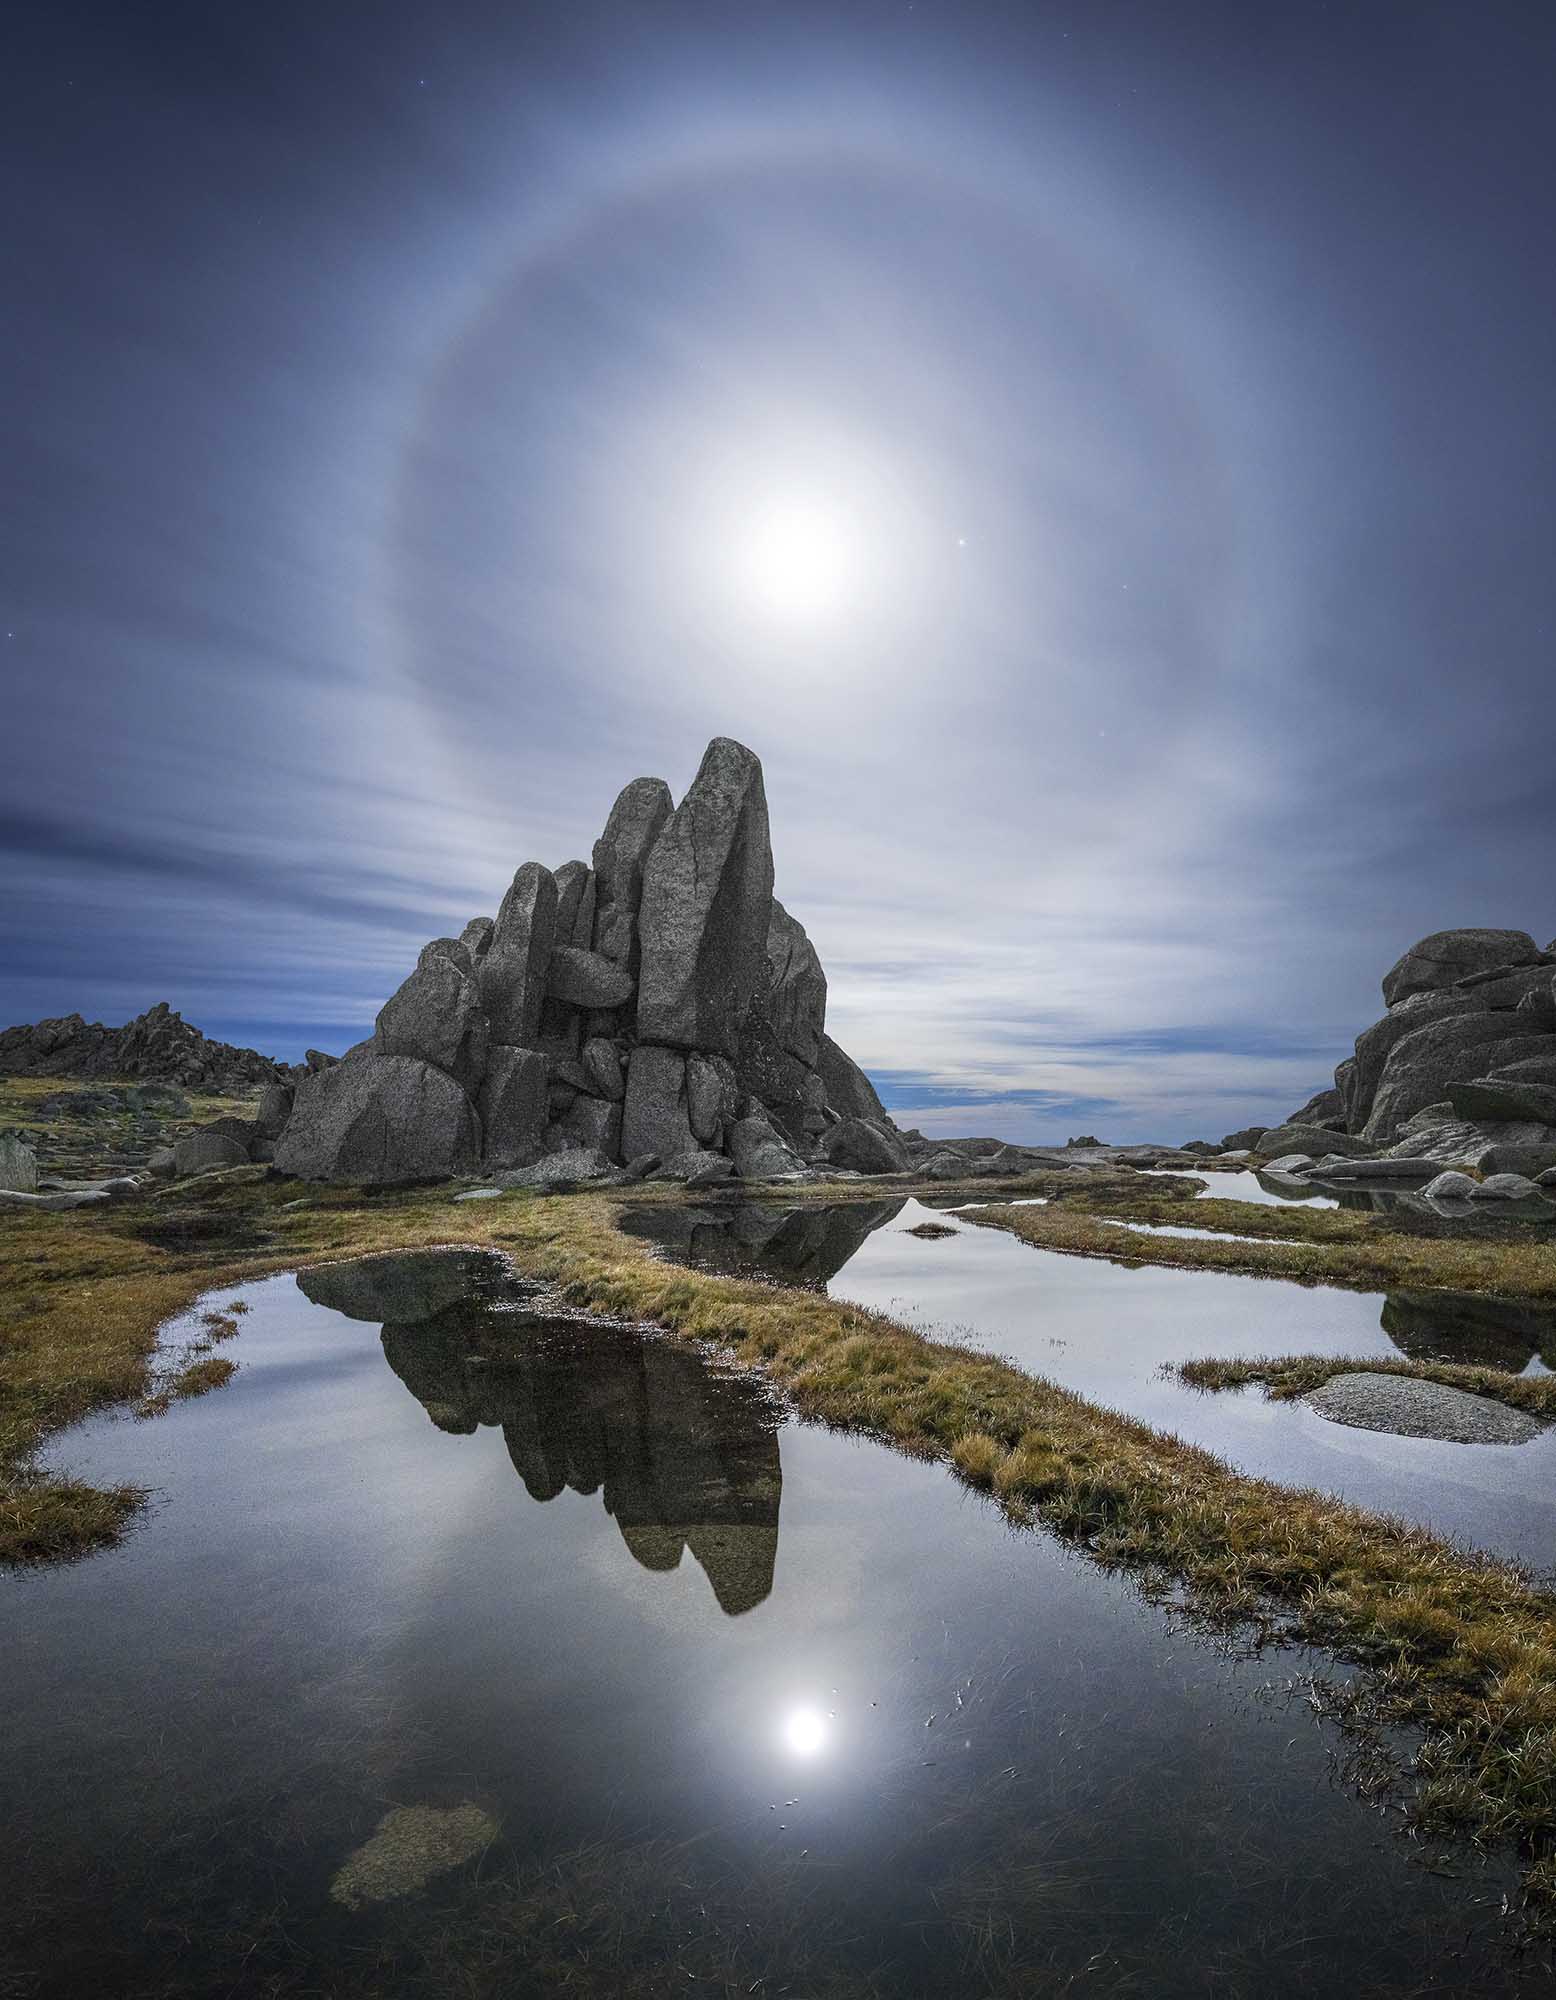 Moon halo shining over rock escarpment with reflective water in foreground